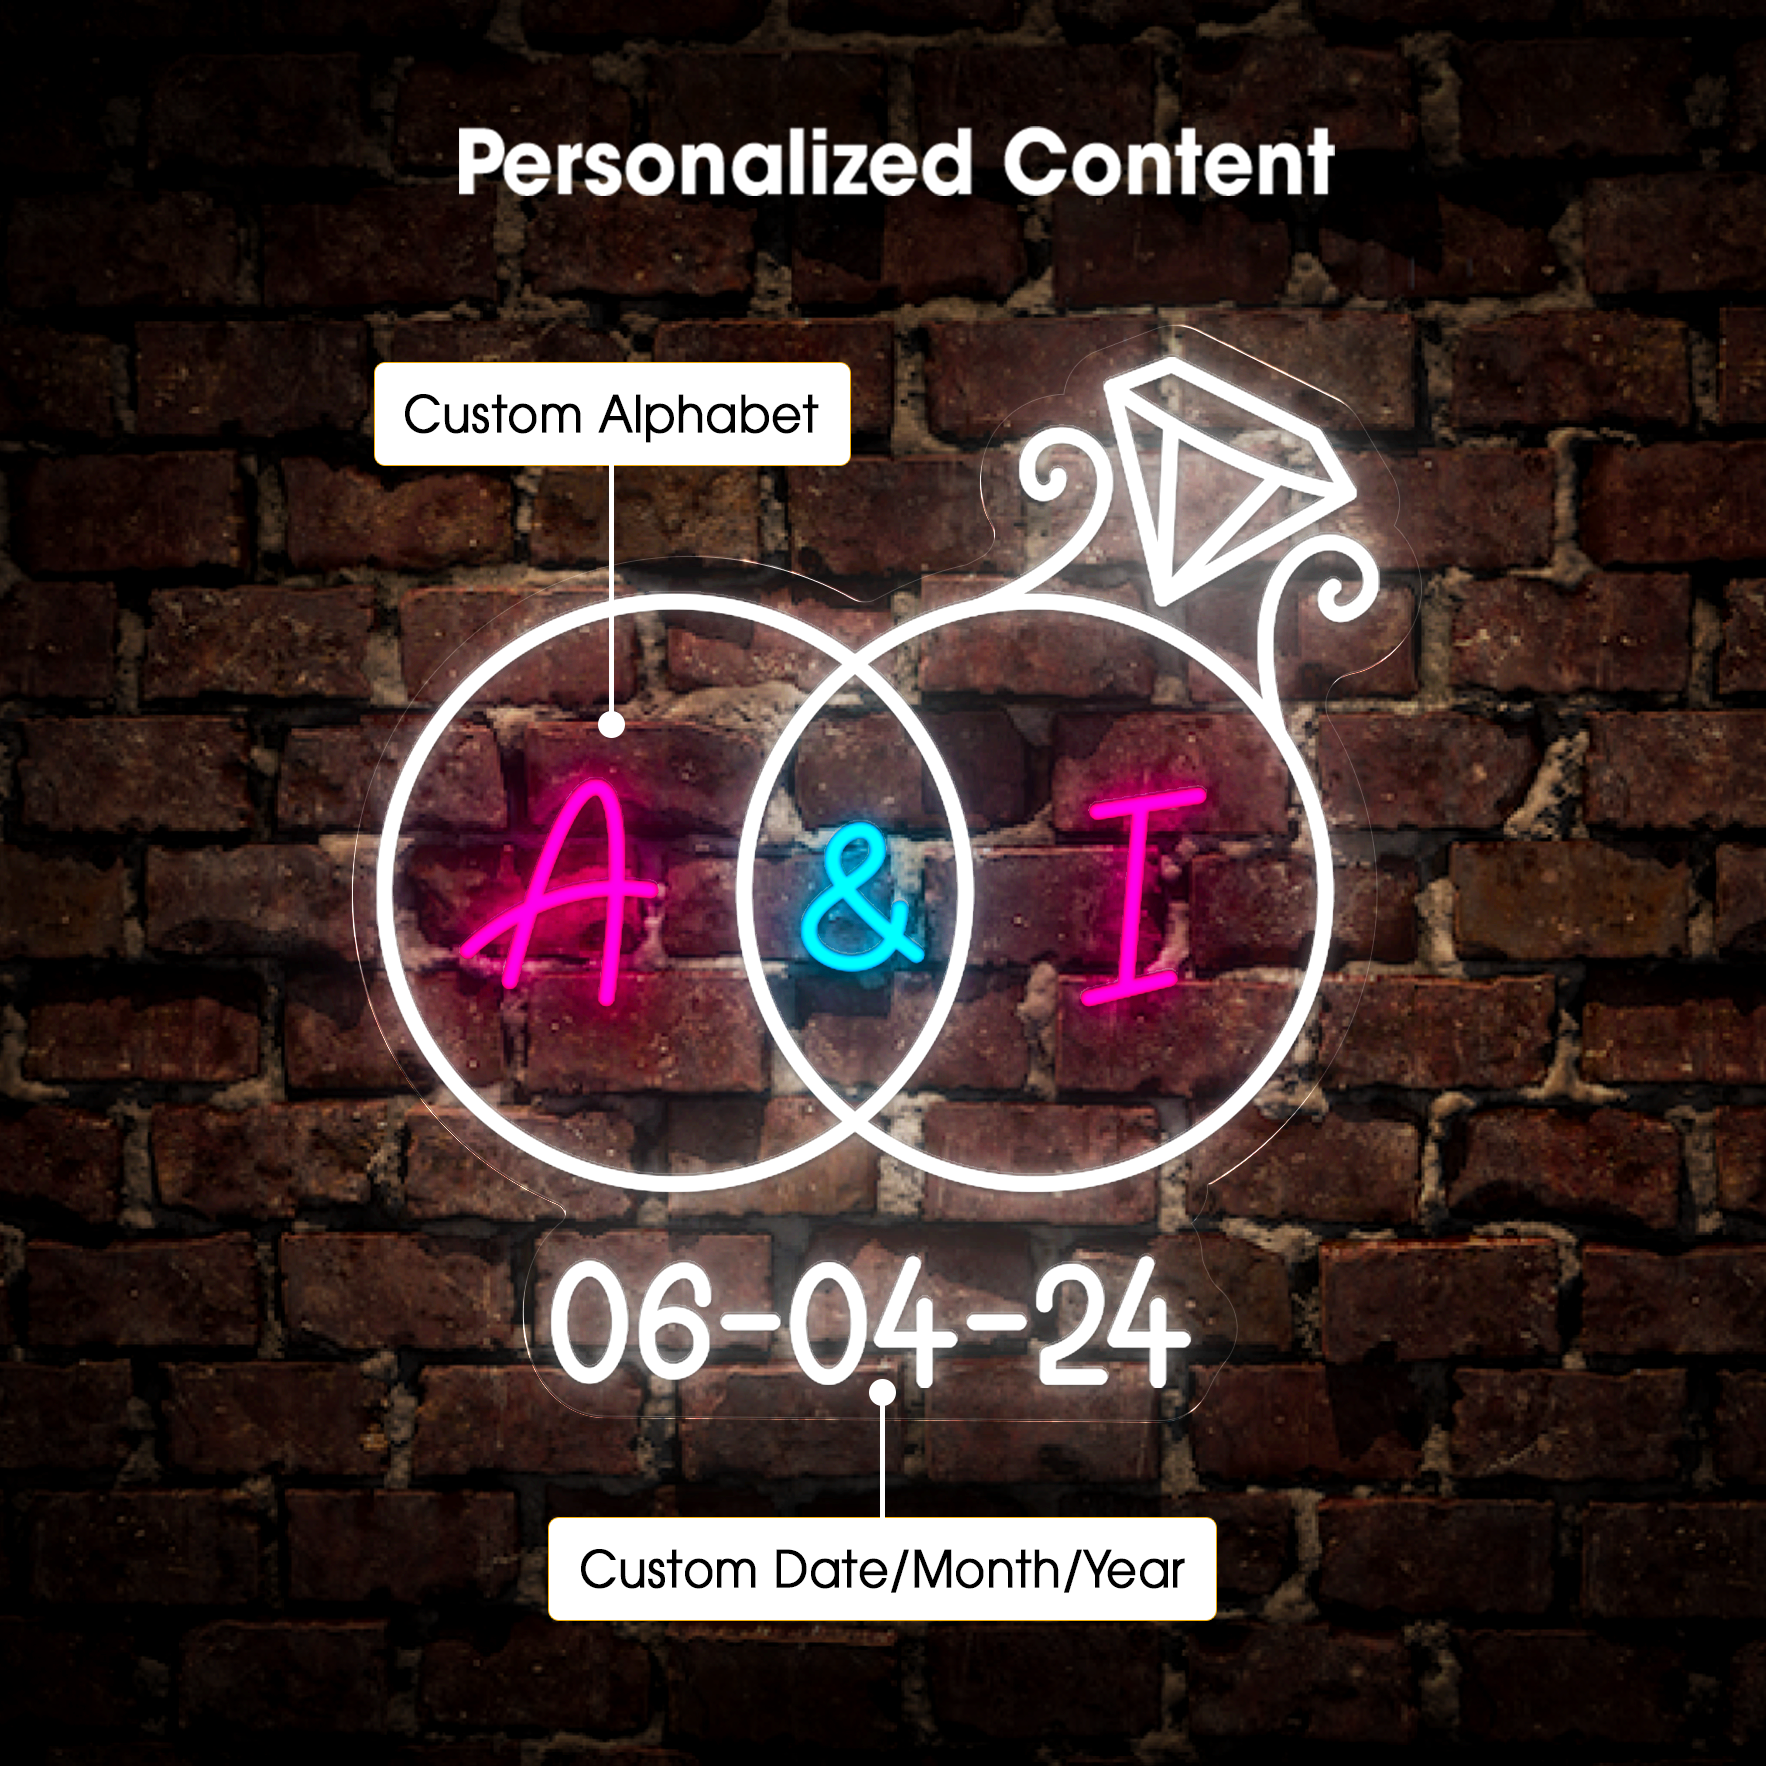 Personalized_Content_080f0c74-4a7c-4bea-b6b8-2e2ae521586c.png